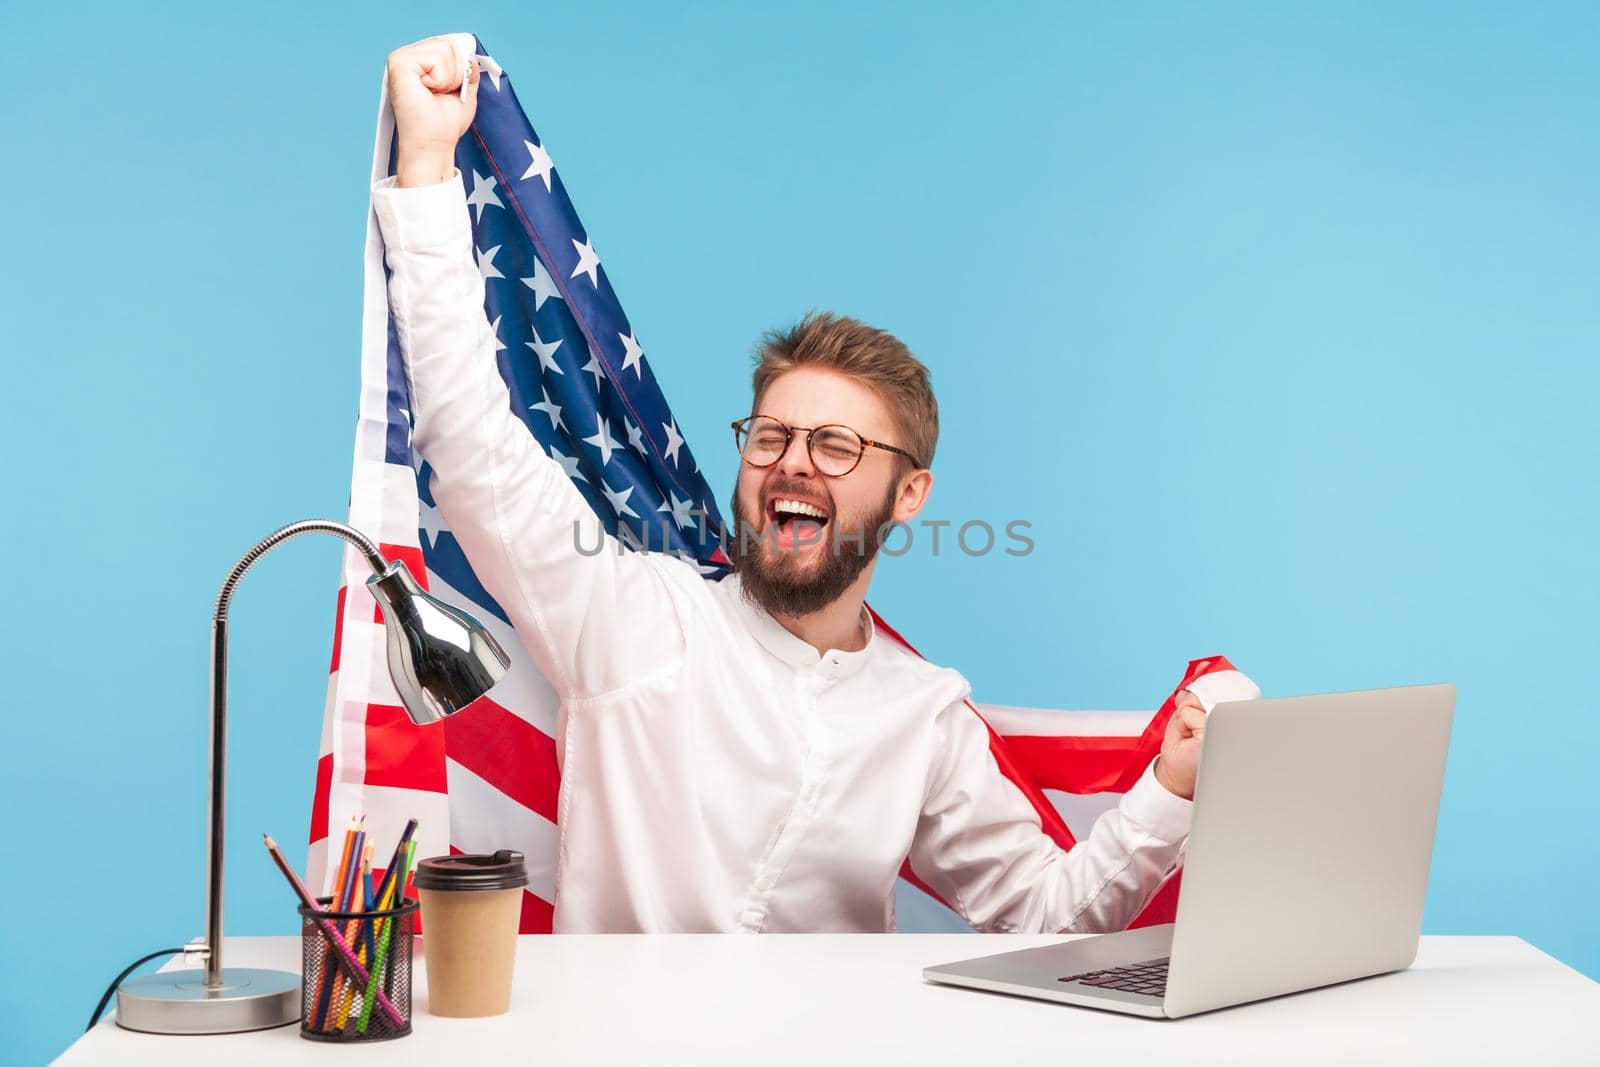 Extremely happy businessman raising American flag and yelling crazy for joy in office workplace, celebrating labor day or US Independence day 4th of july, government employment support. studio shot